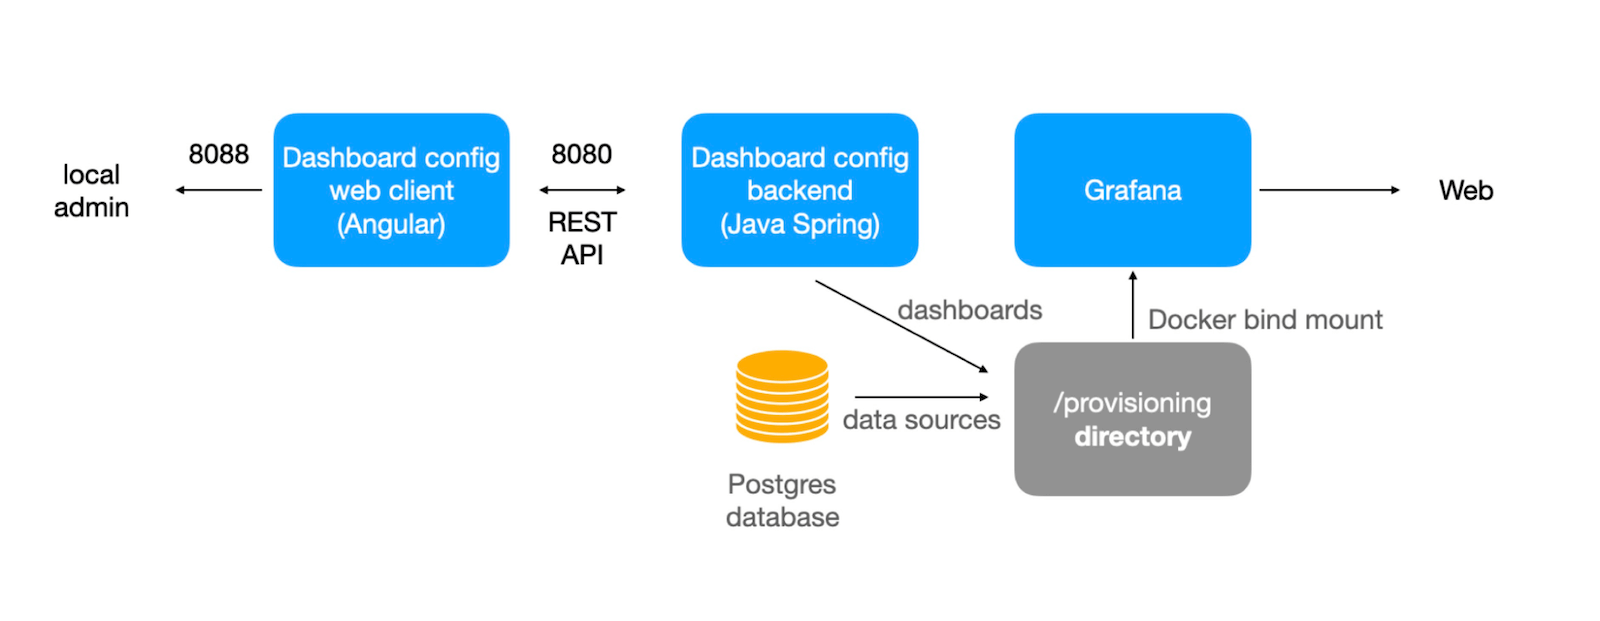 A diagram showing the configuration of a web application that can automatically provision dashboards.